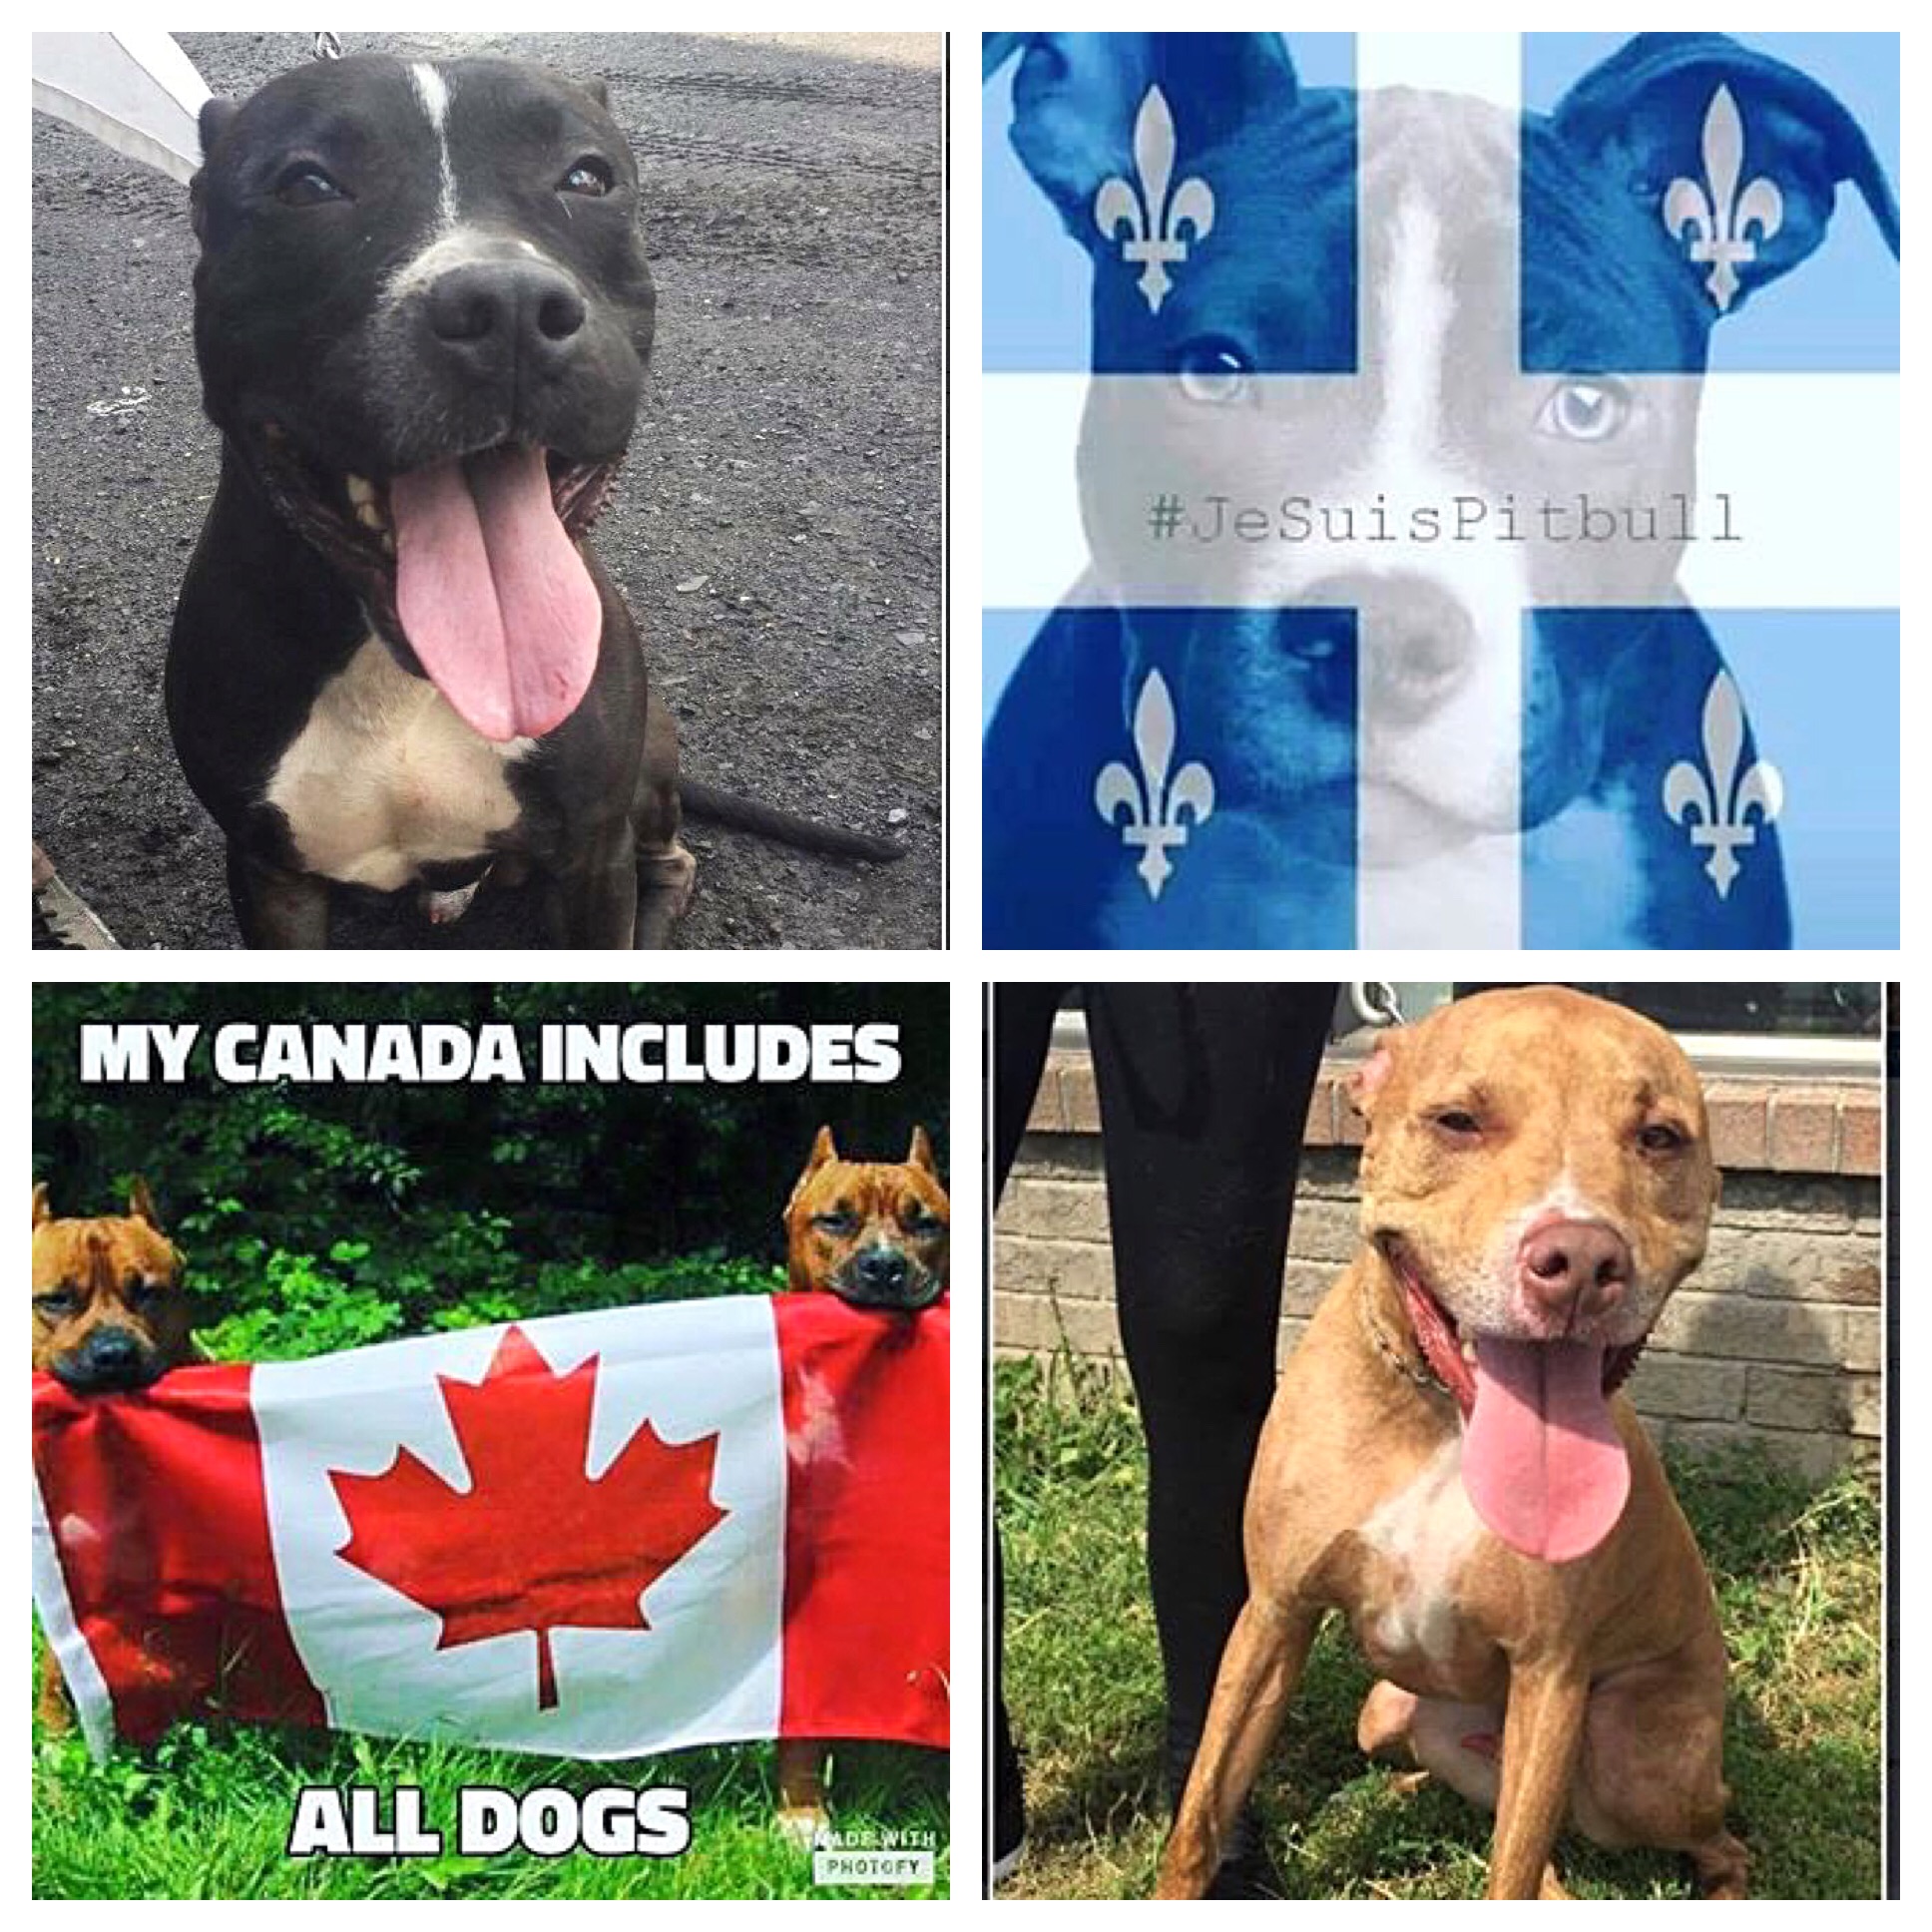 You are currently viewing 2017 Montreal End BSL Advocacy and Rescue Mission